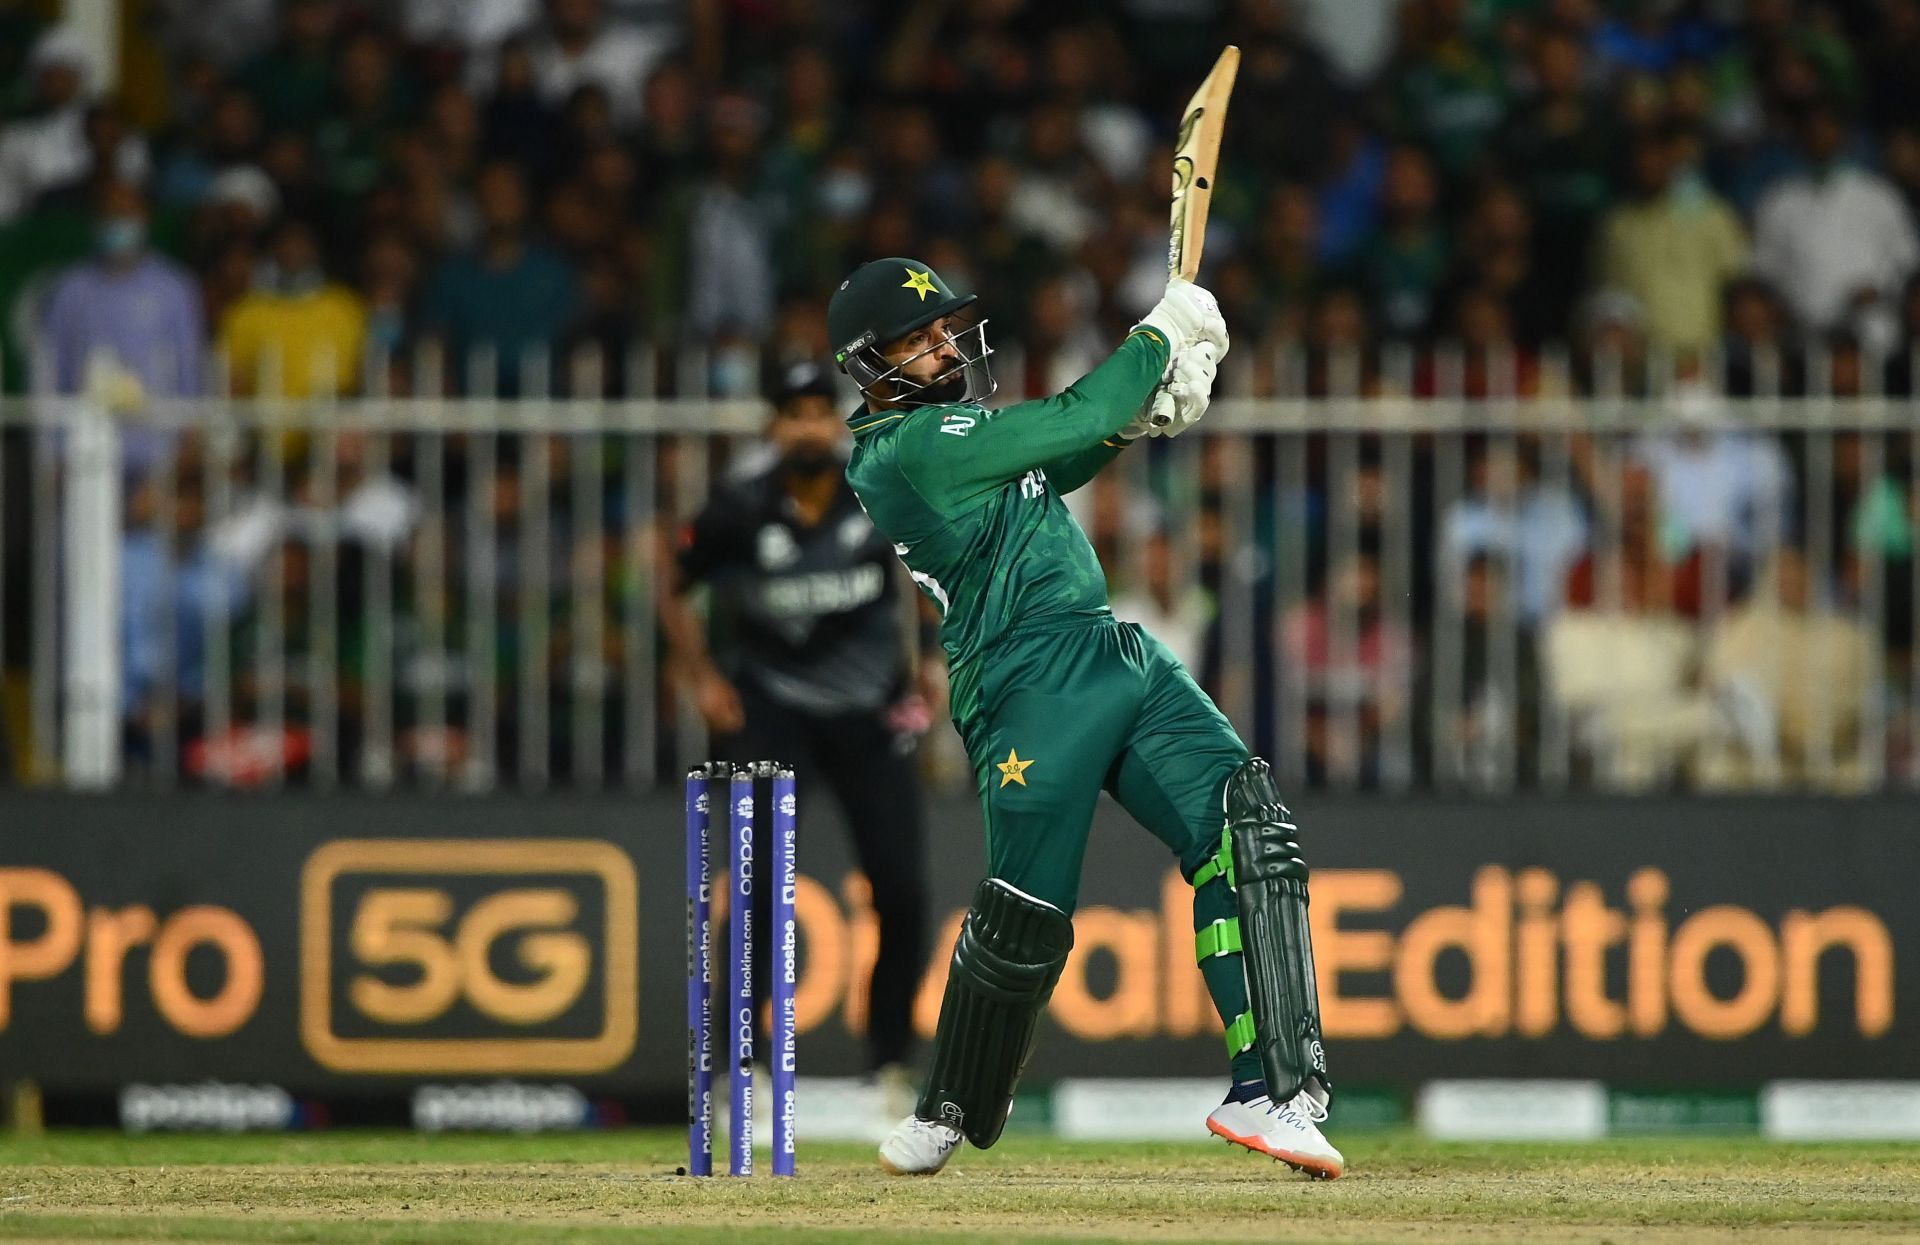 Asif Ali of Pakistan plays a shot during the T20 World Cup match between Pakistan and New Zealand at Sharjah. Pic: Getty Images